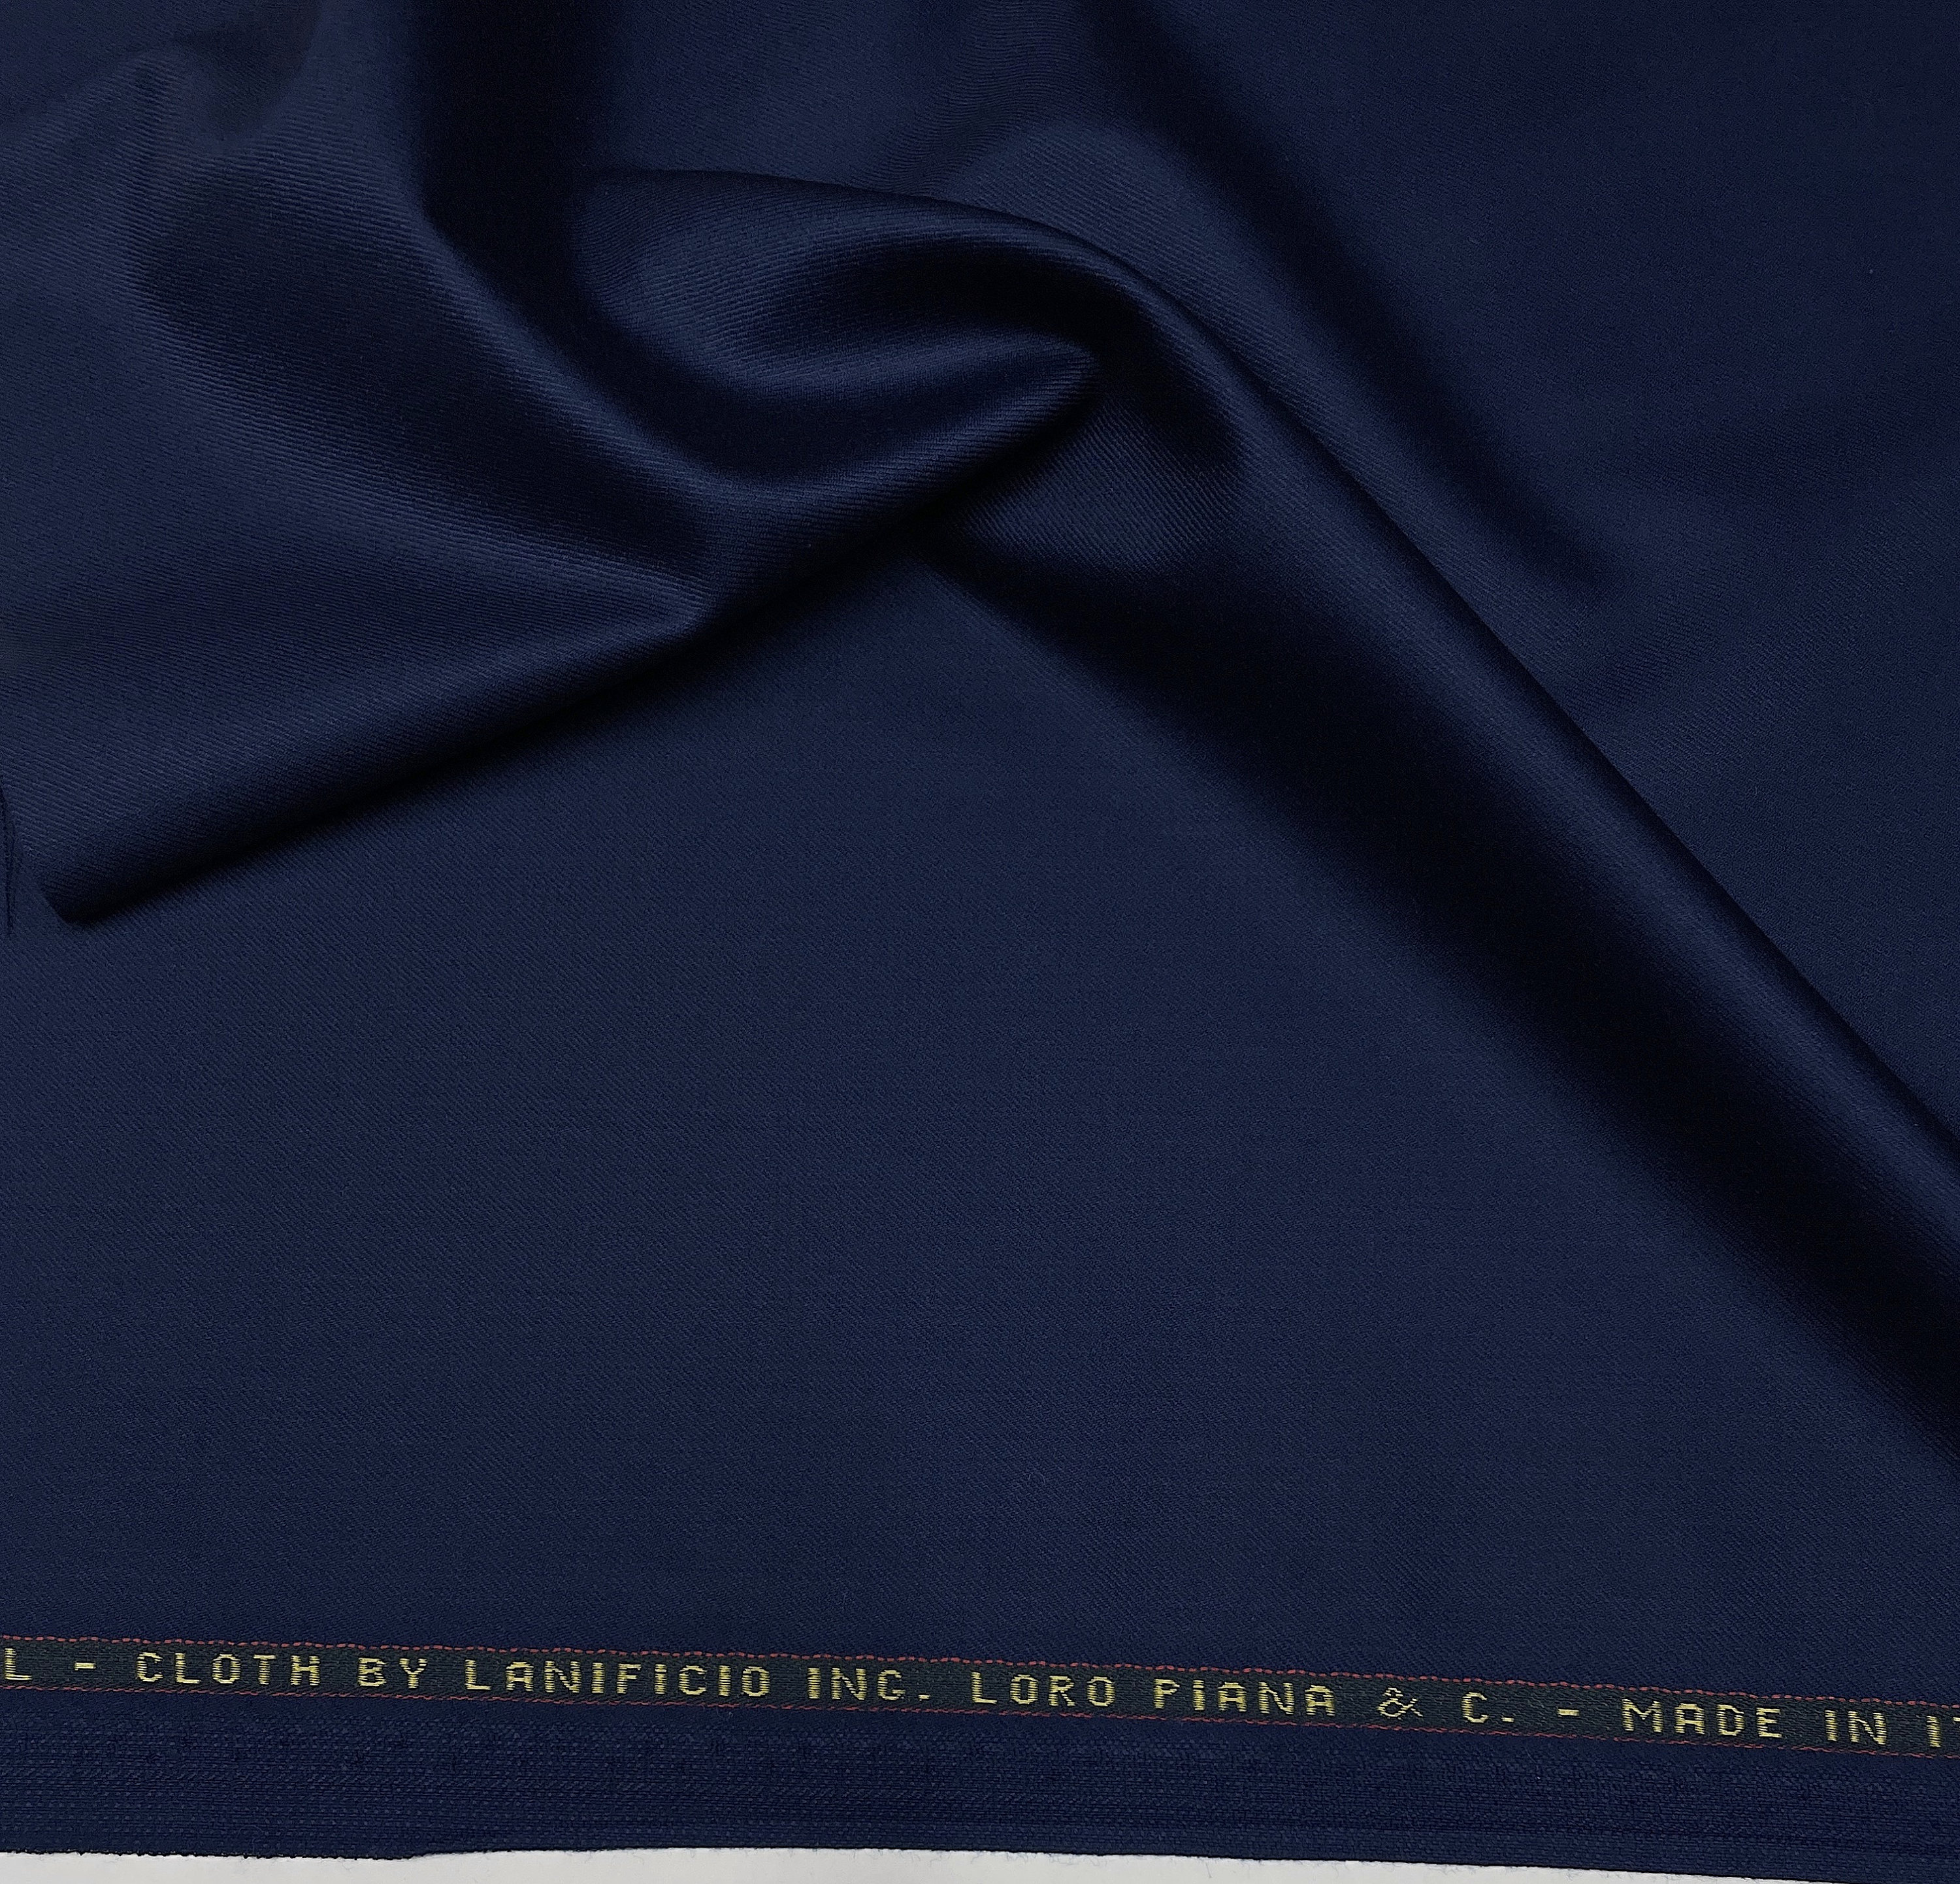 Loro Piana Wool Suiting Fabric, 150s NAVY BLUE Australis, Made in Italy,  for Dress, Suit, Jacket Sewing, by 3.5 Meter 